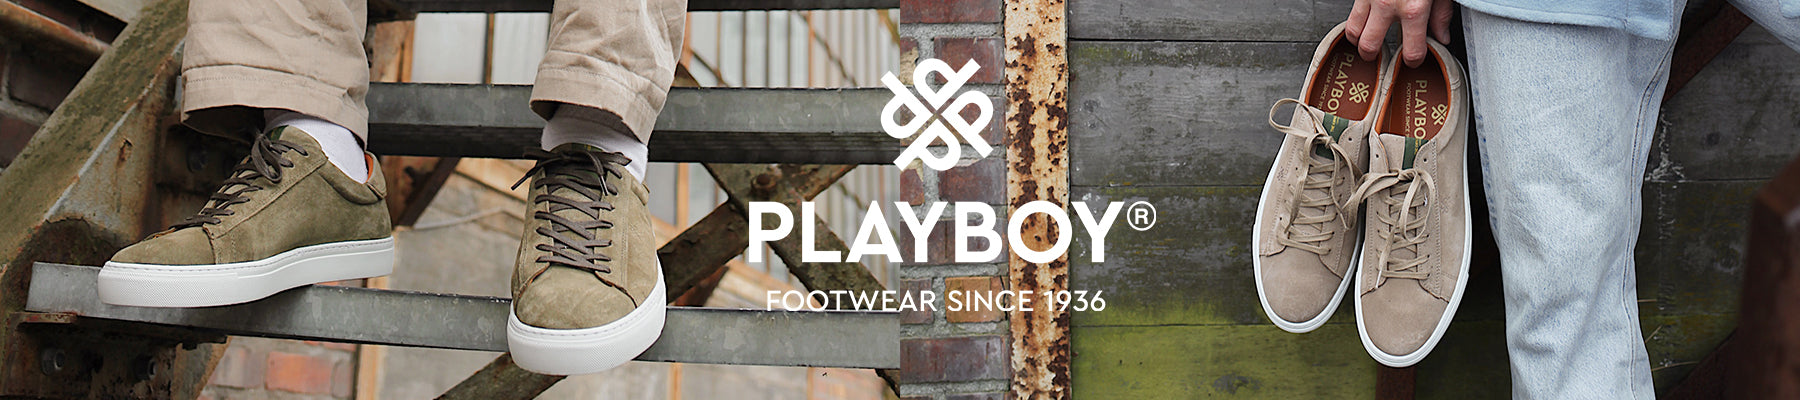 Playboy Footwear is a men's shoe brand that embodies the iconic Playboy lifestyle with its stylish and sophisticated designs.